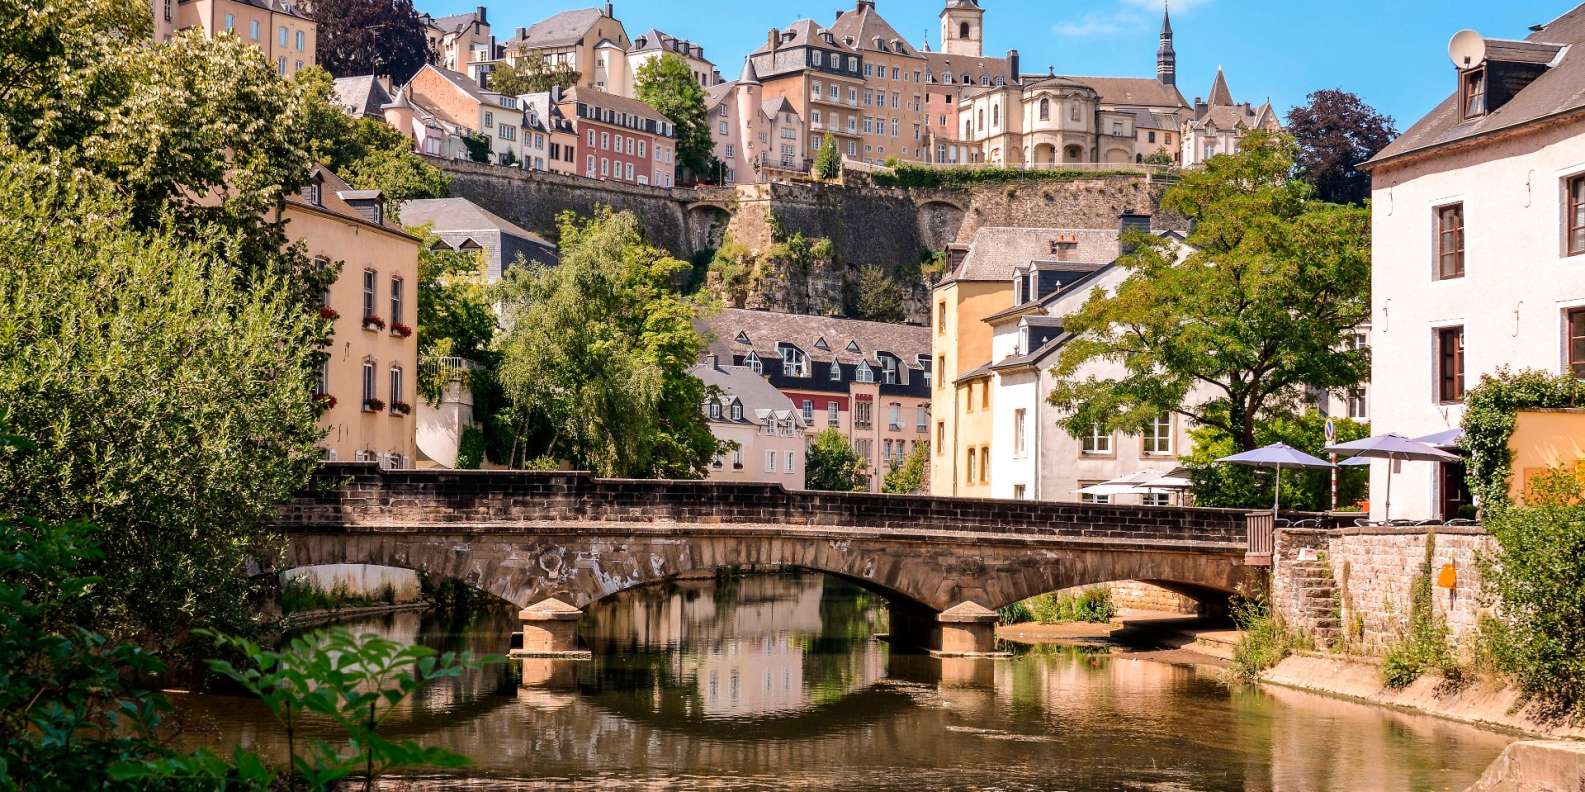 things to do in Luxembourg